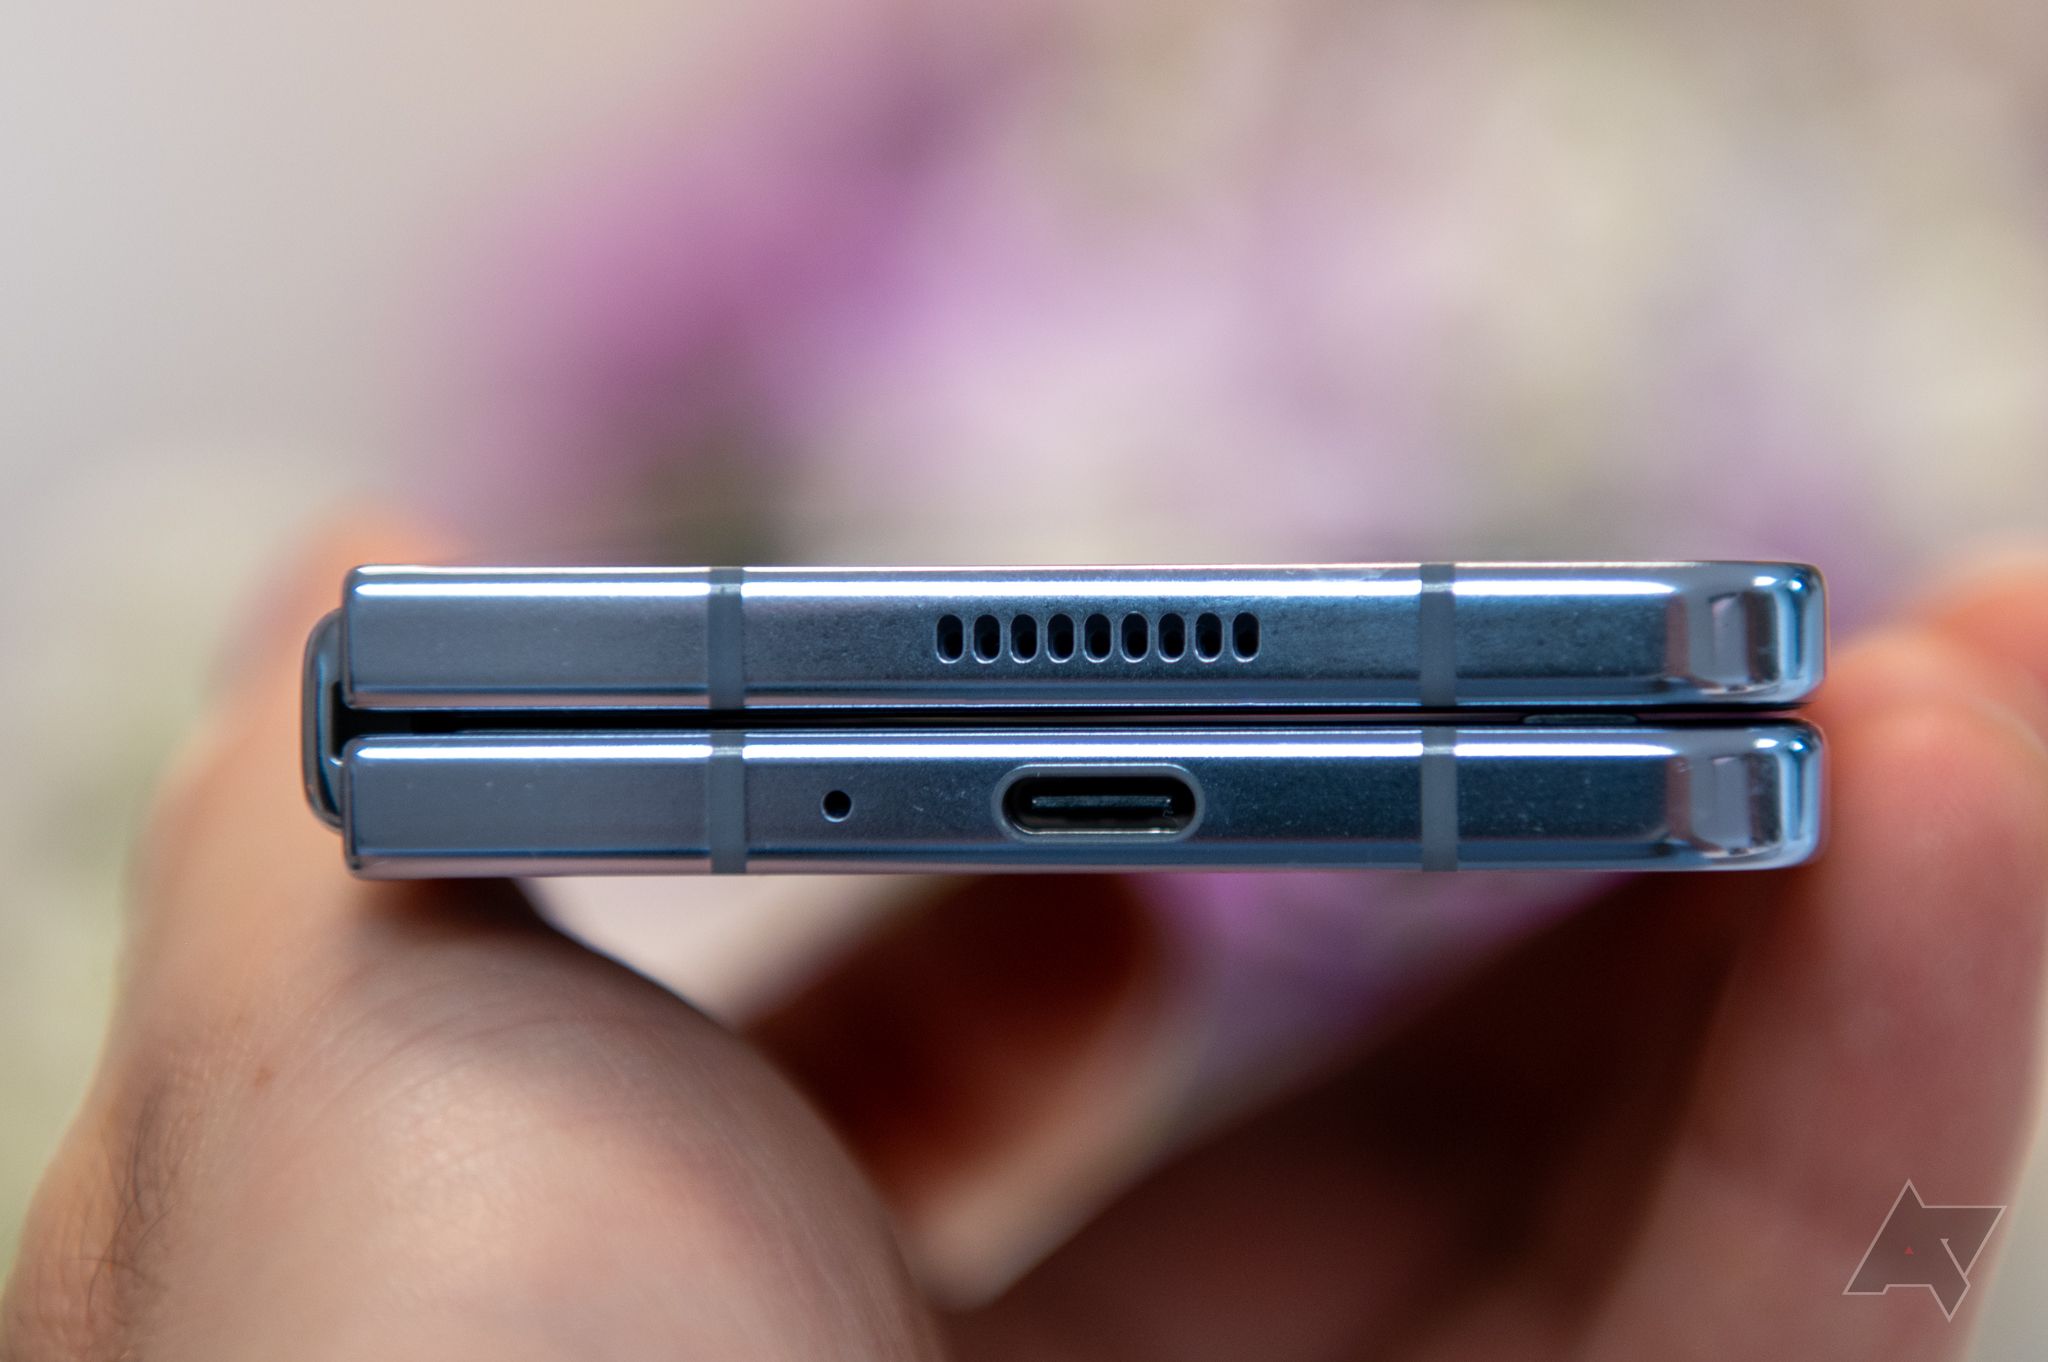 Bottom of the Samsung Galaxy Z Fold 5, showing the speaker cutouts, microphone and USB-C charging port